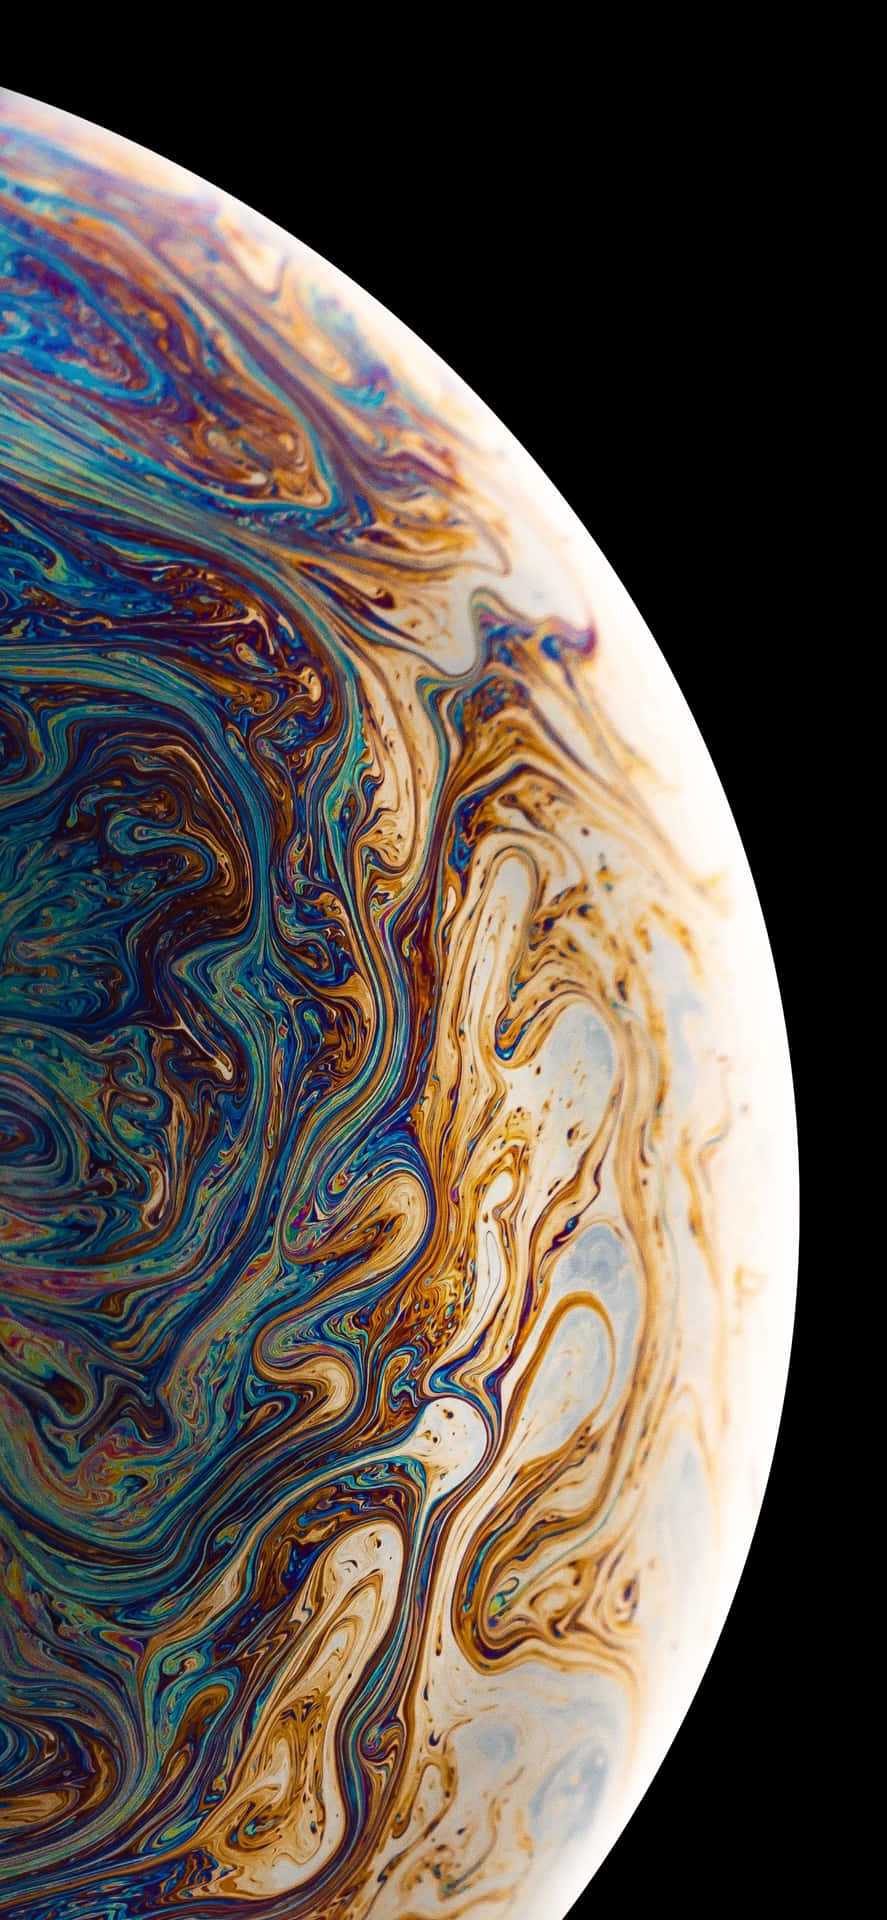 A Close Up Of A Colorful Swirled Object Wallpaper